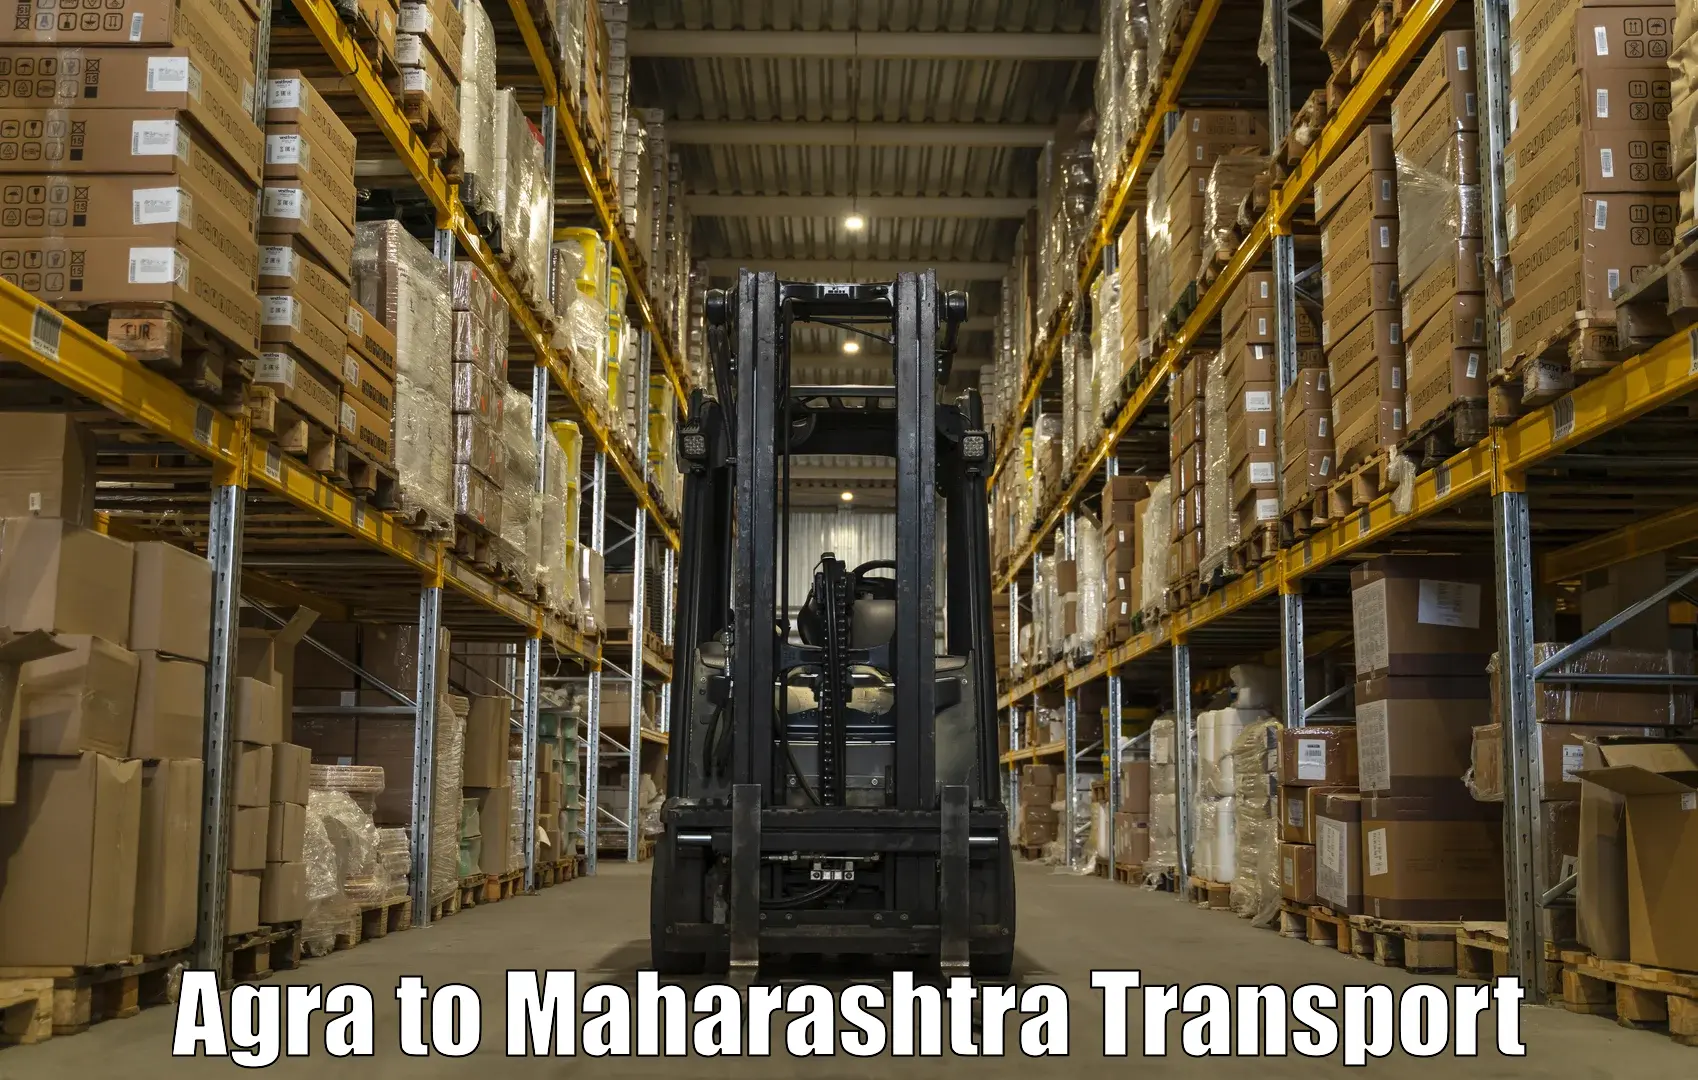 Air freight transport services Agra to Jalgaon